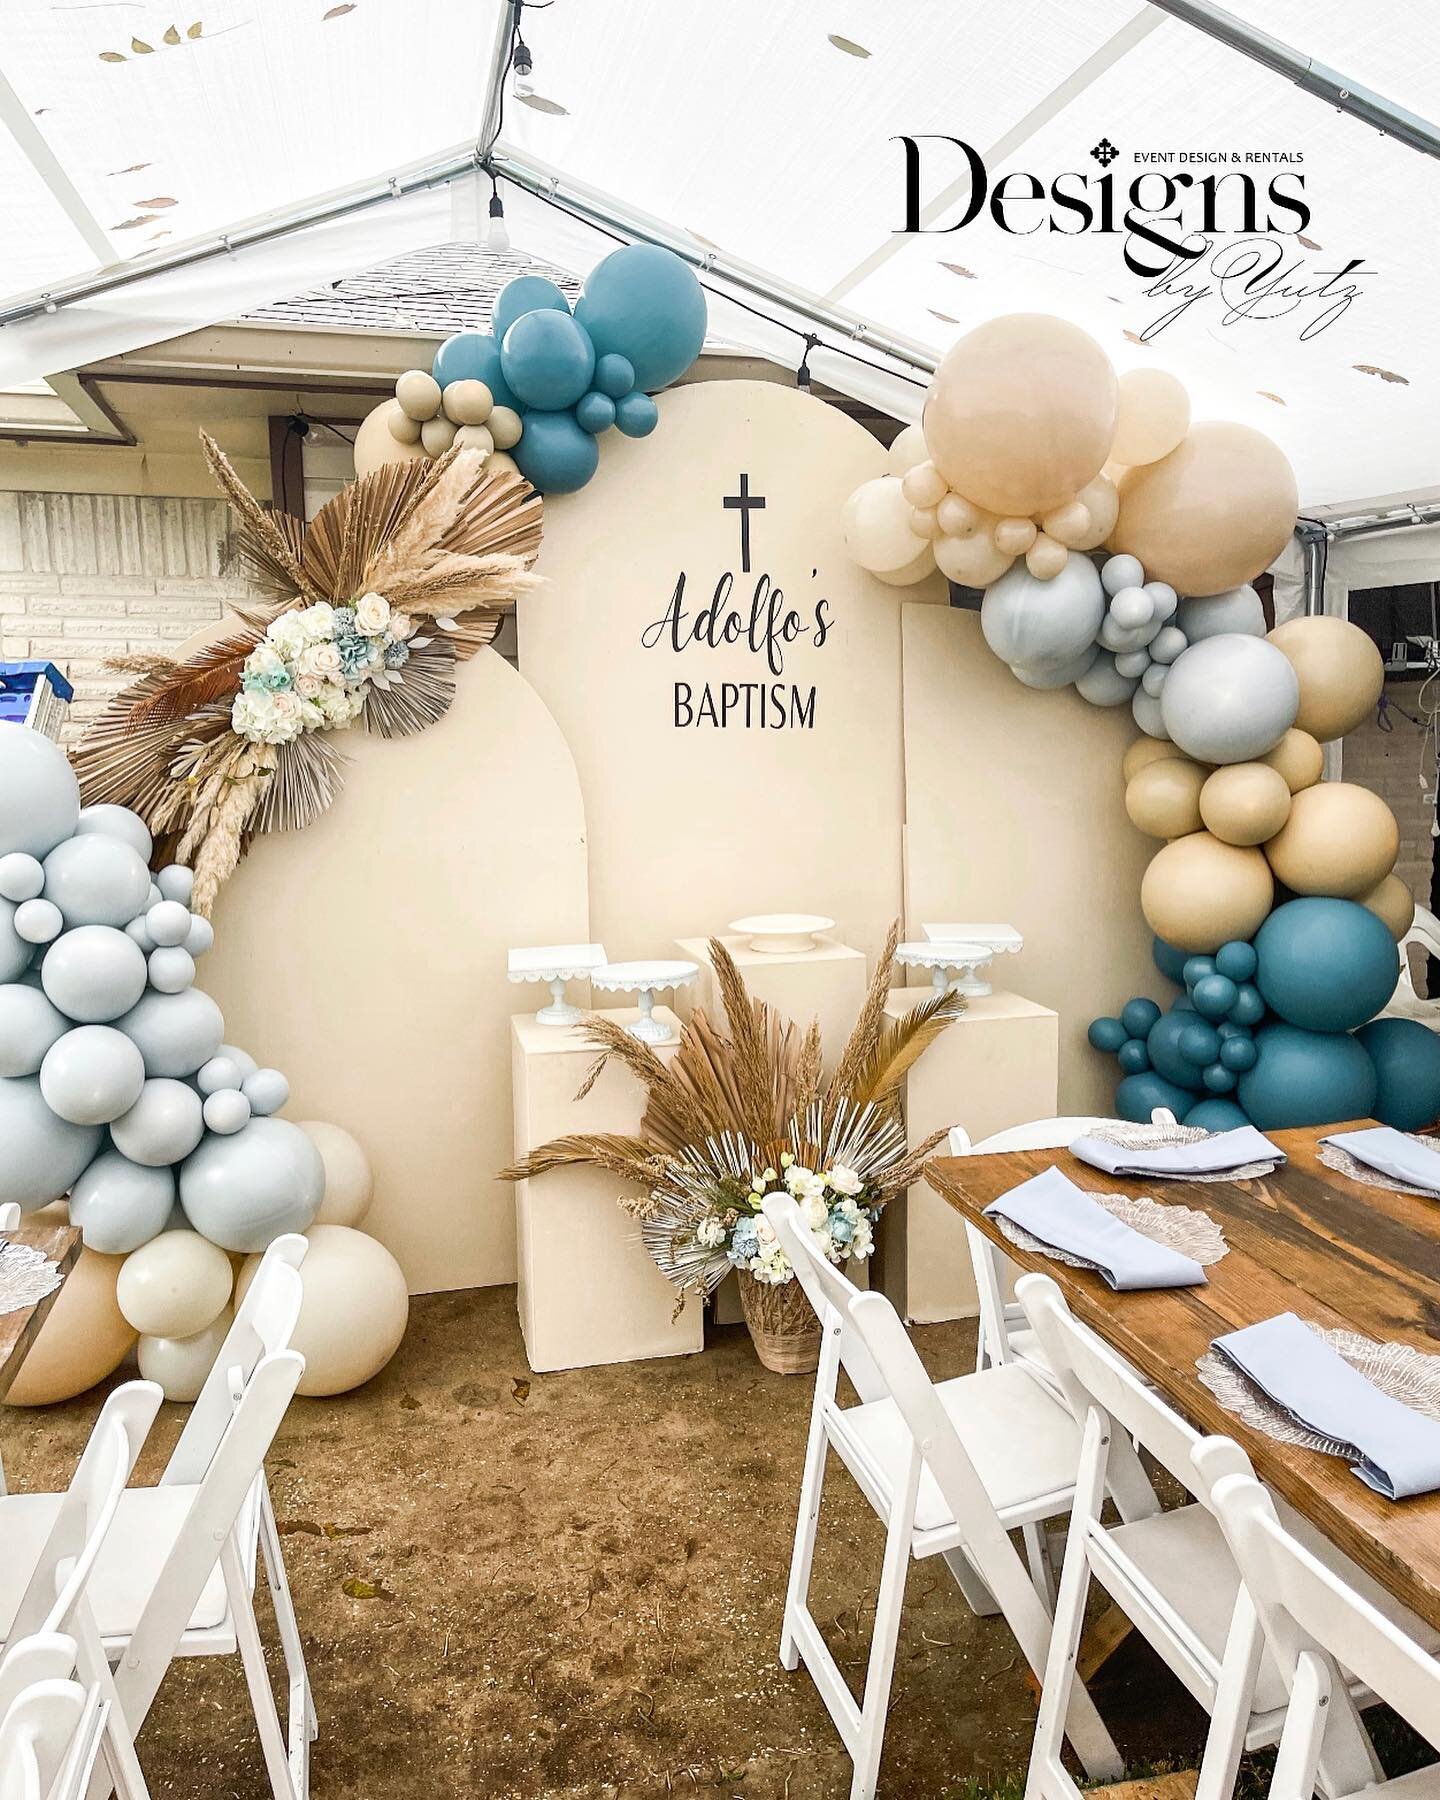 B A P T I S M ✝️🌾

Back in December we had the honor to be part of Adolfo&rsquo;s Baptism! Although the weather was a little gloomy, the party didn&rsquo;t stop!🥳

Thank you our client for letting us be part of Adolfo&rsquo;s special day!!🤍
⠀
From